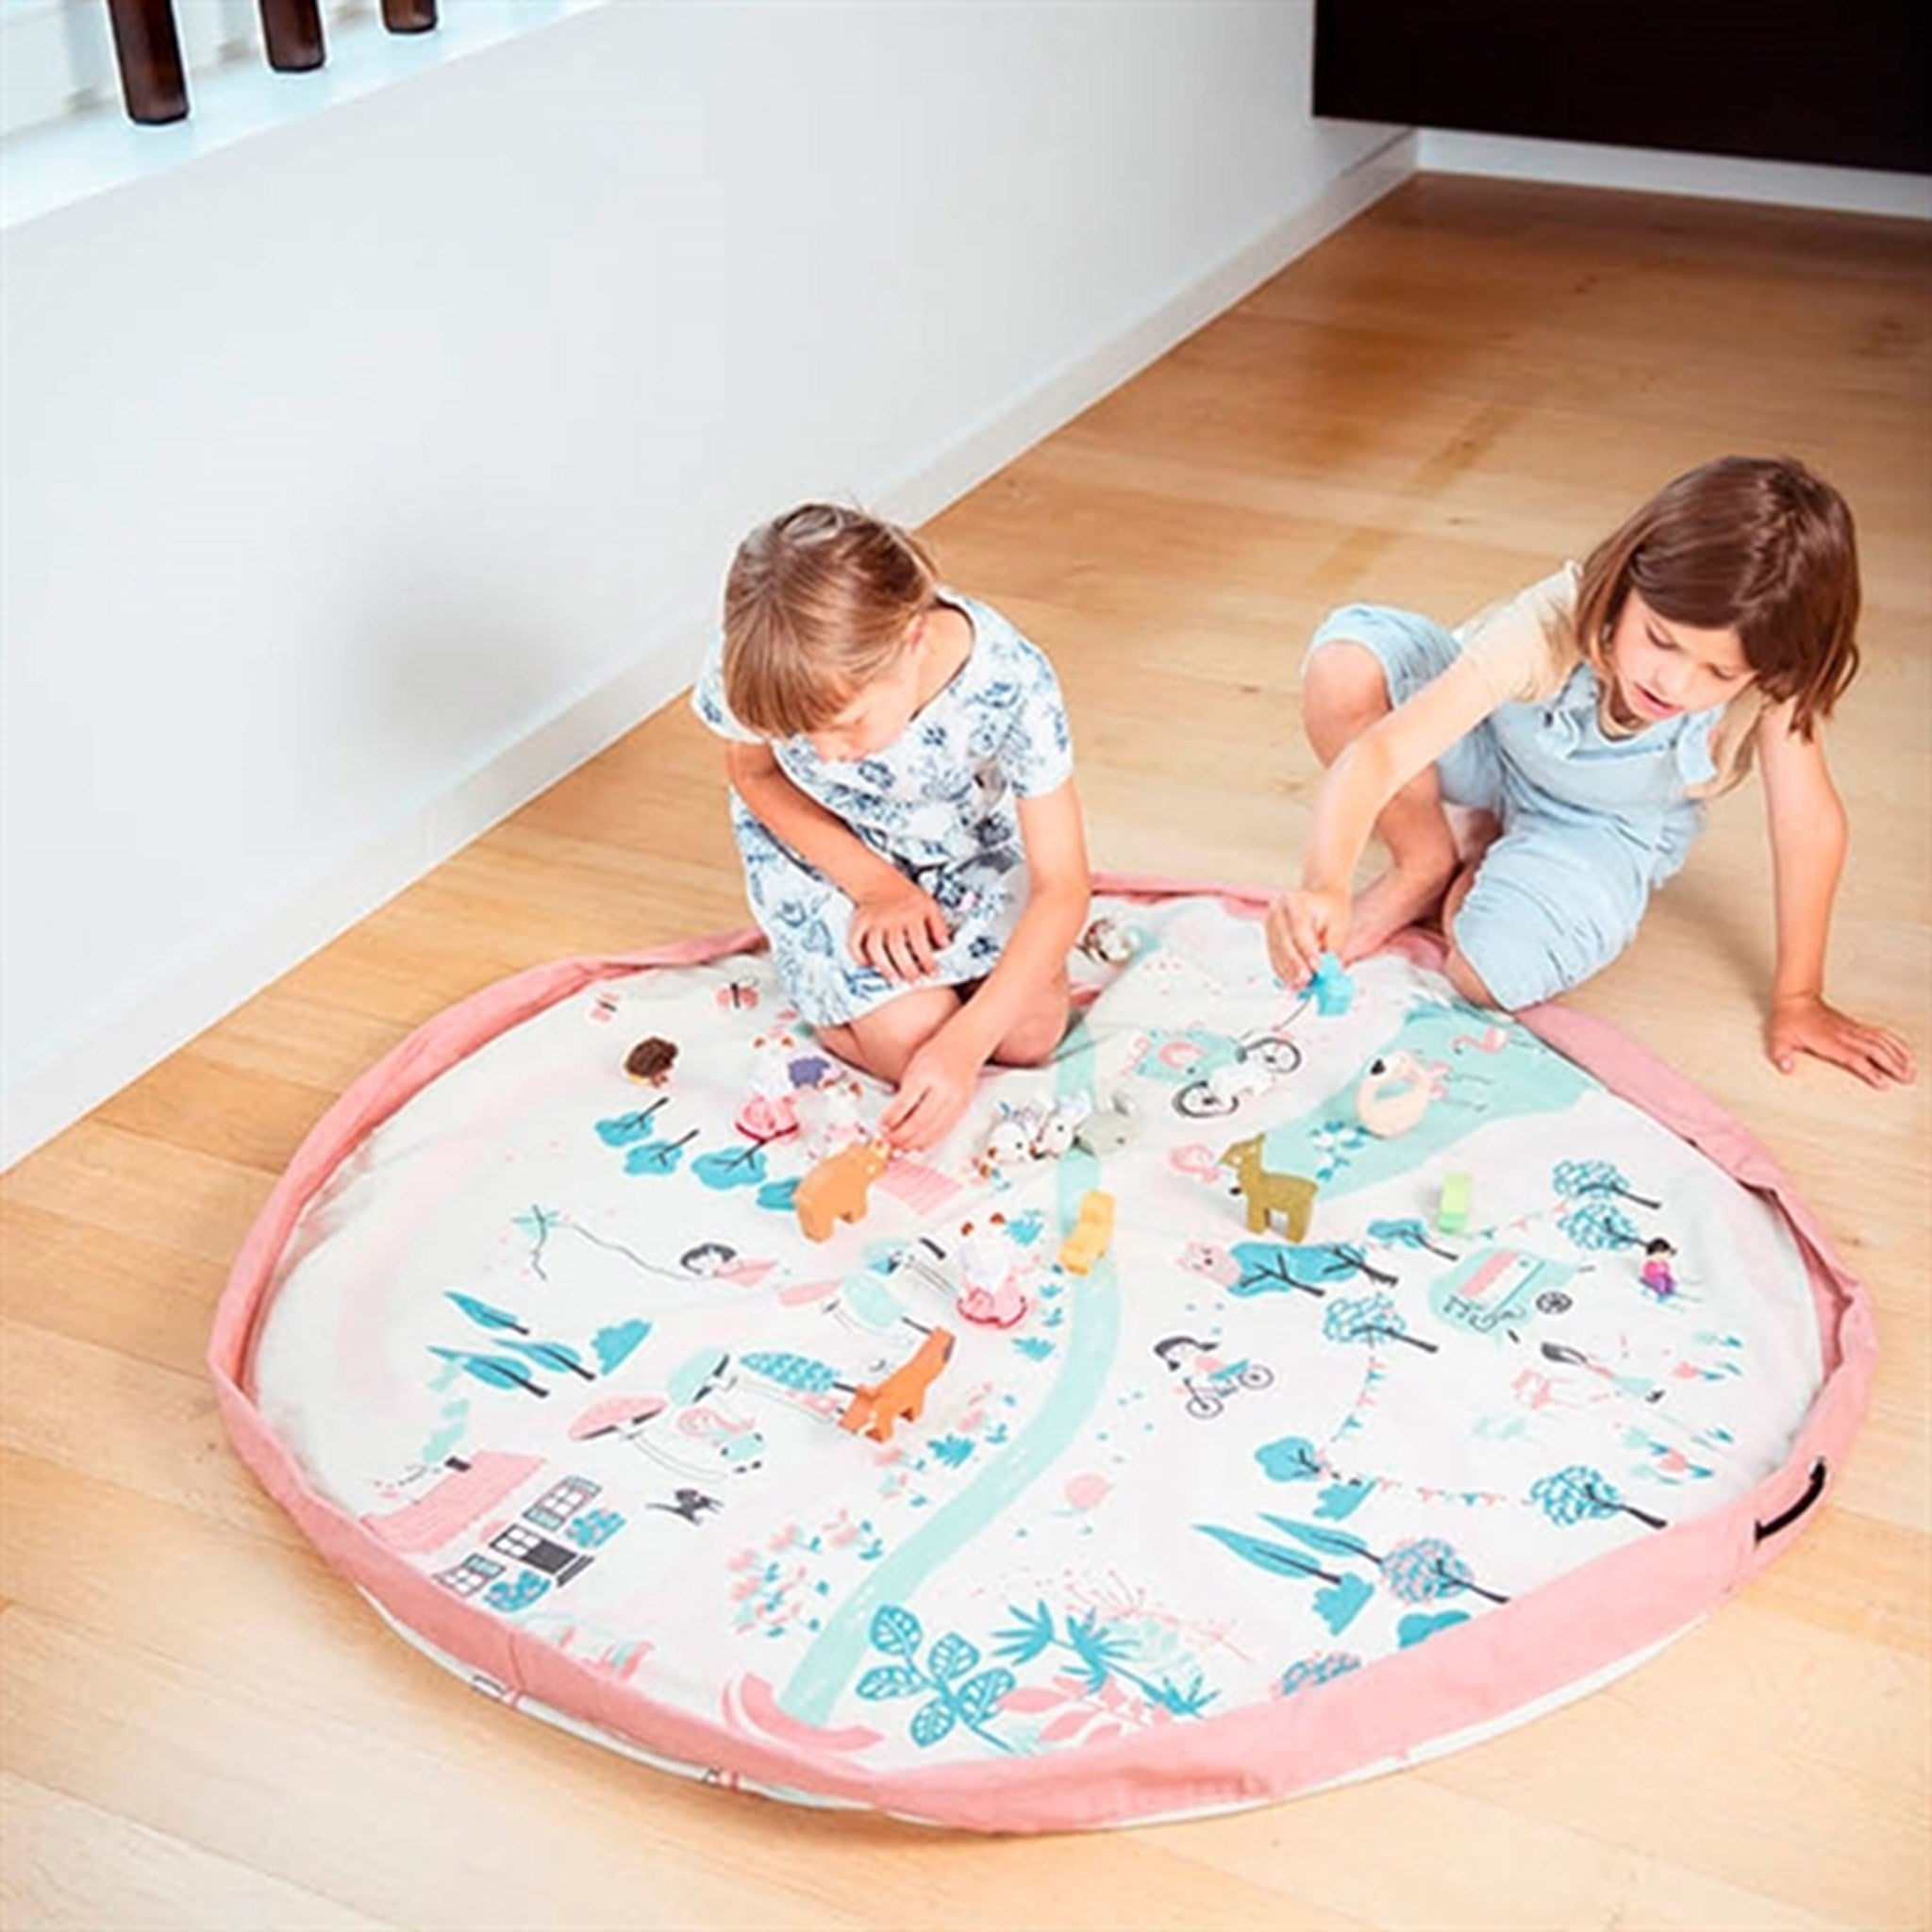 Play&Go 2-in-1 Play Mat Walk in a park 4